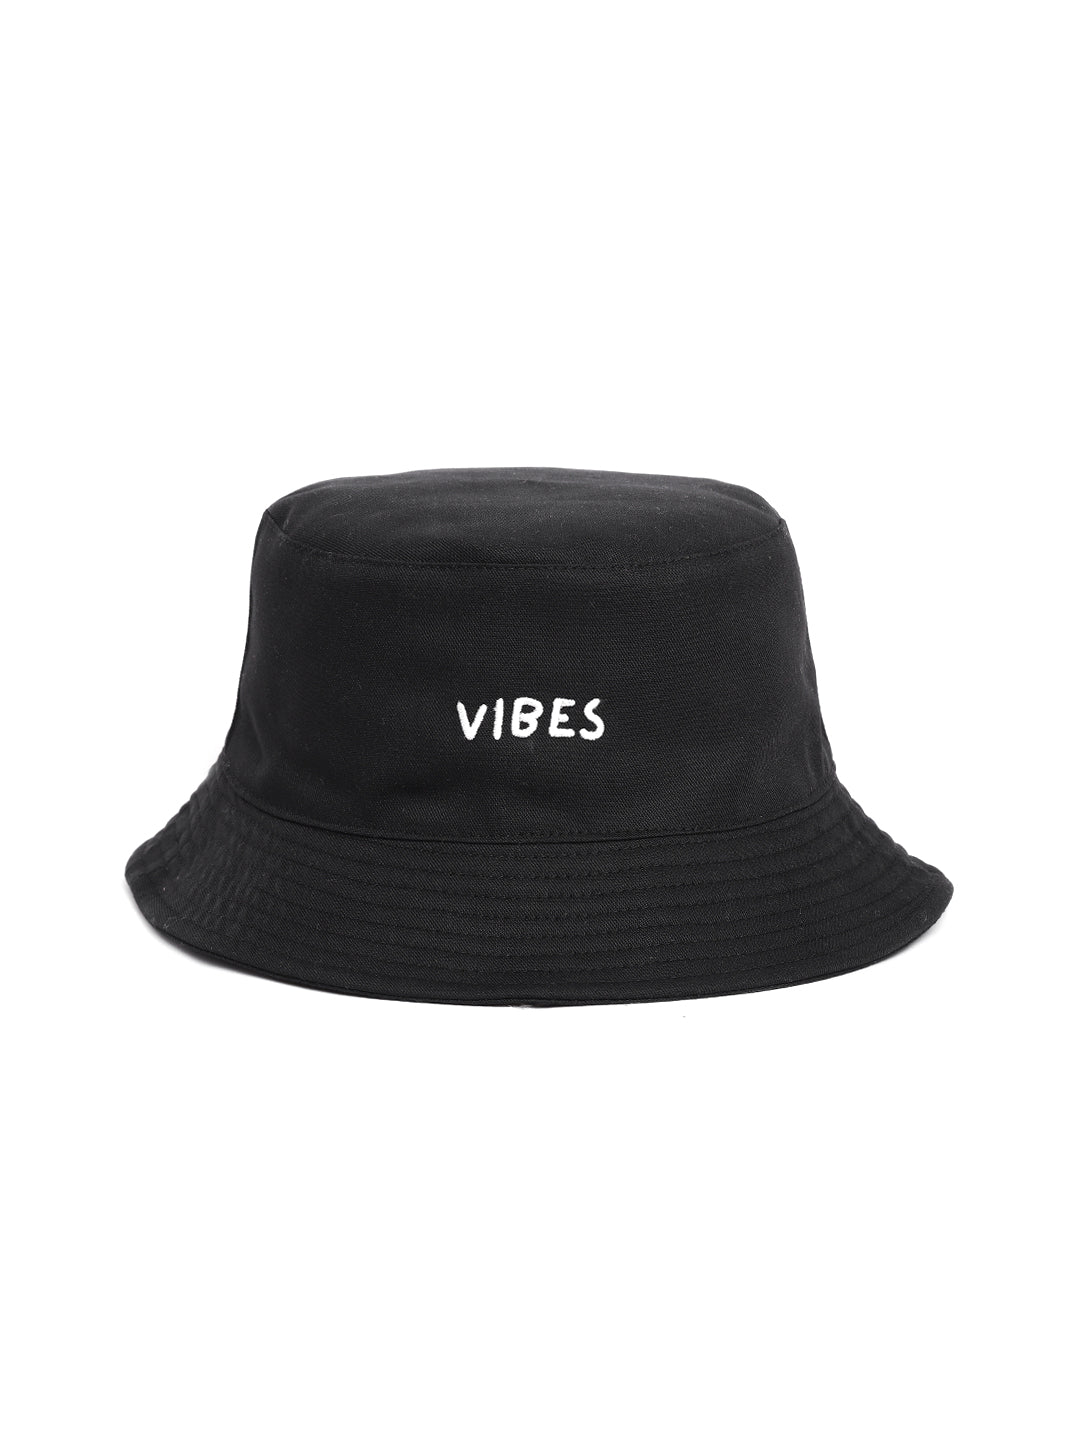 Blueberry Black VIBES Reversible Embroidered bucket hat